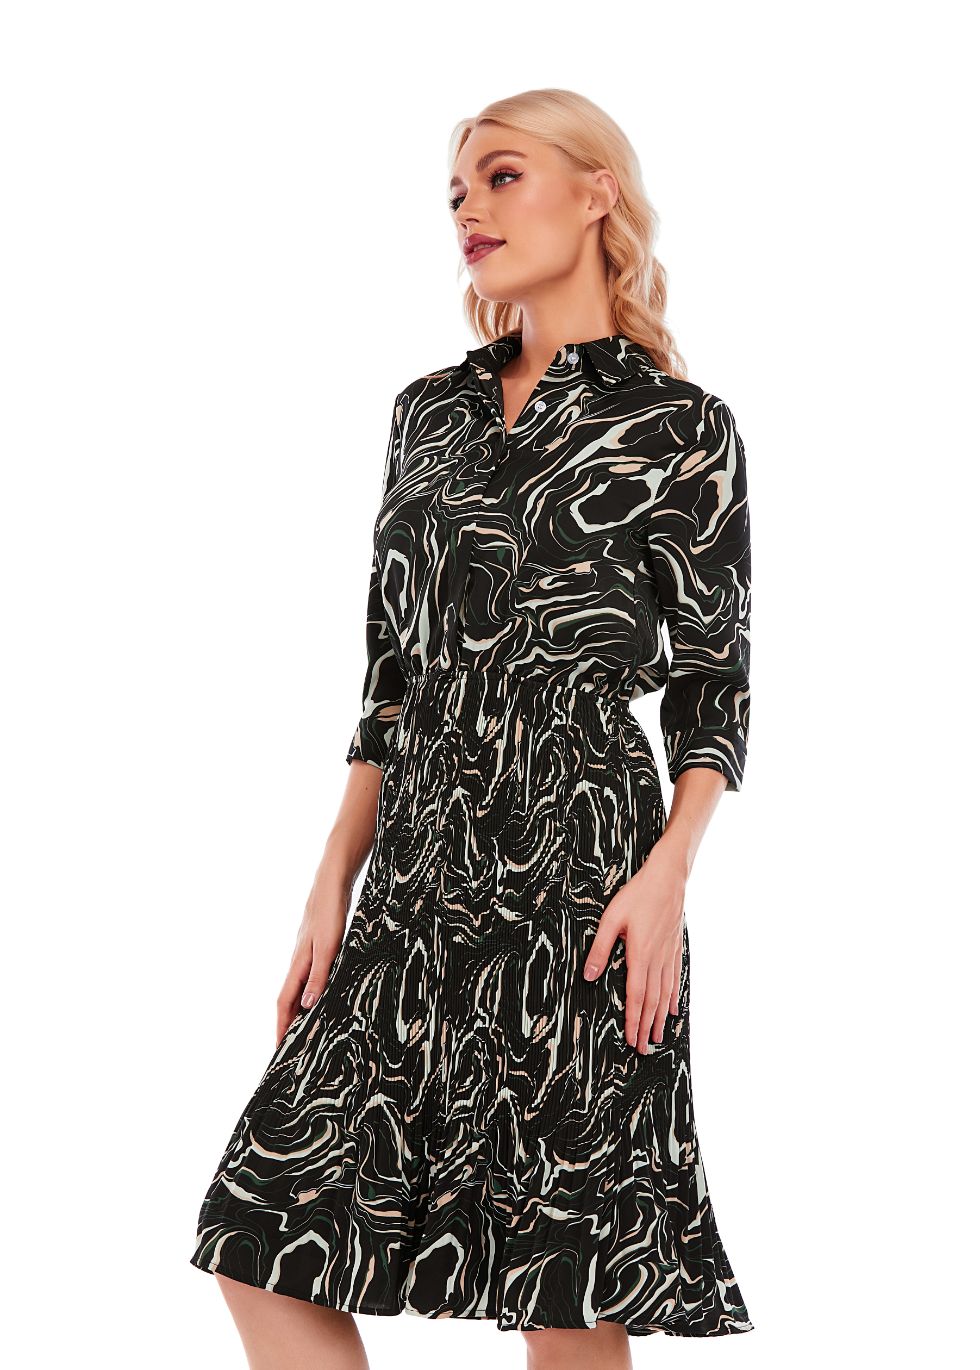 Micro Pleated Skirt Print Dress with 3/4 Sleeve and Button Down Top - alamaud